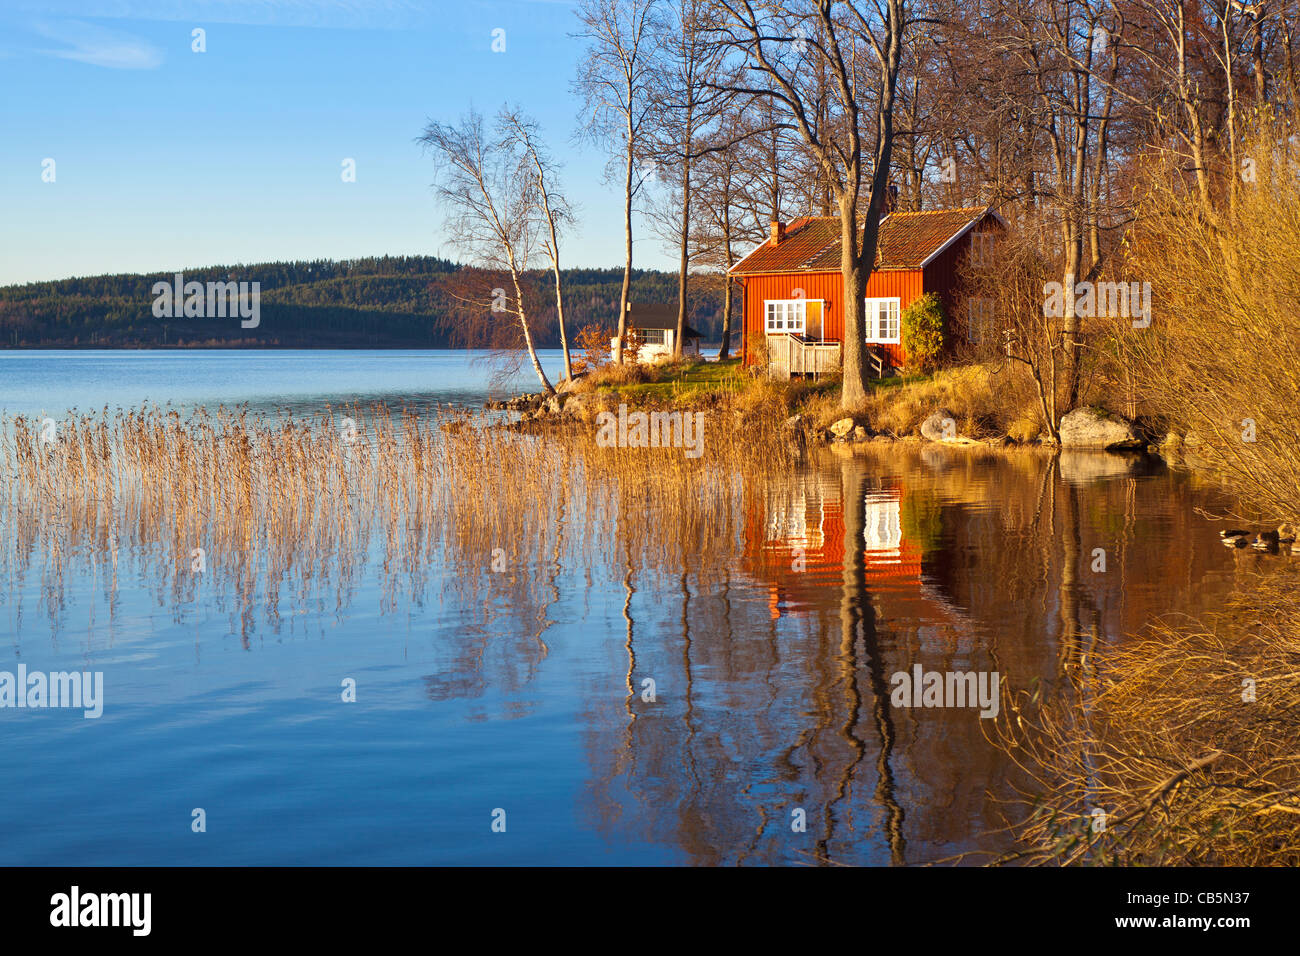 Typical Swedish or Scandinavian red wooden house by a lake. Lake Sävelången, Ingared, Västra Götaland, Sweden  Model Release: No.  Property Release: No.  Info: Photographer's understanding (but not guaranteed) is that property release is not needed for private properties for commercial use according to swedish law for images taken from public land/road. Image taken from public road. Stock Photo